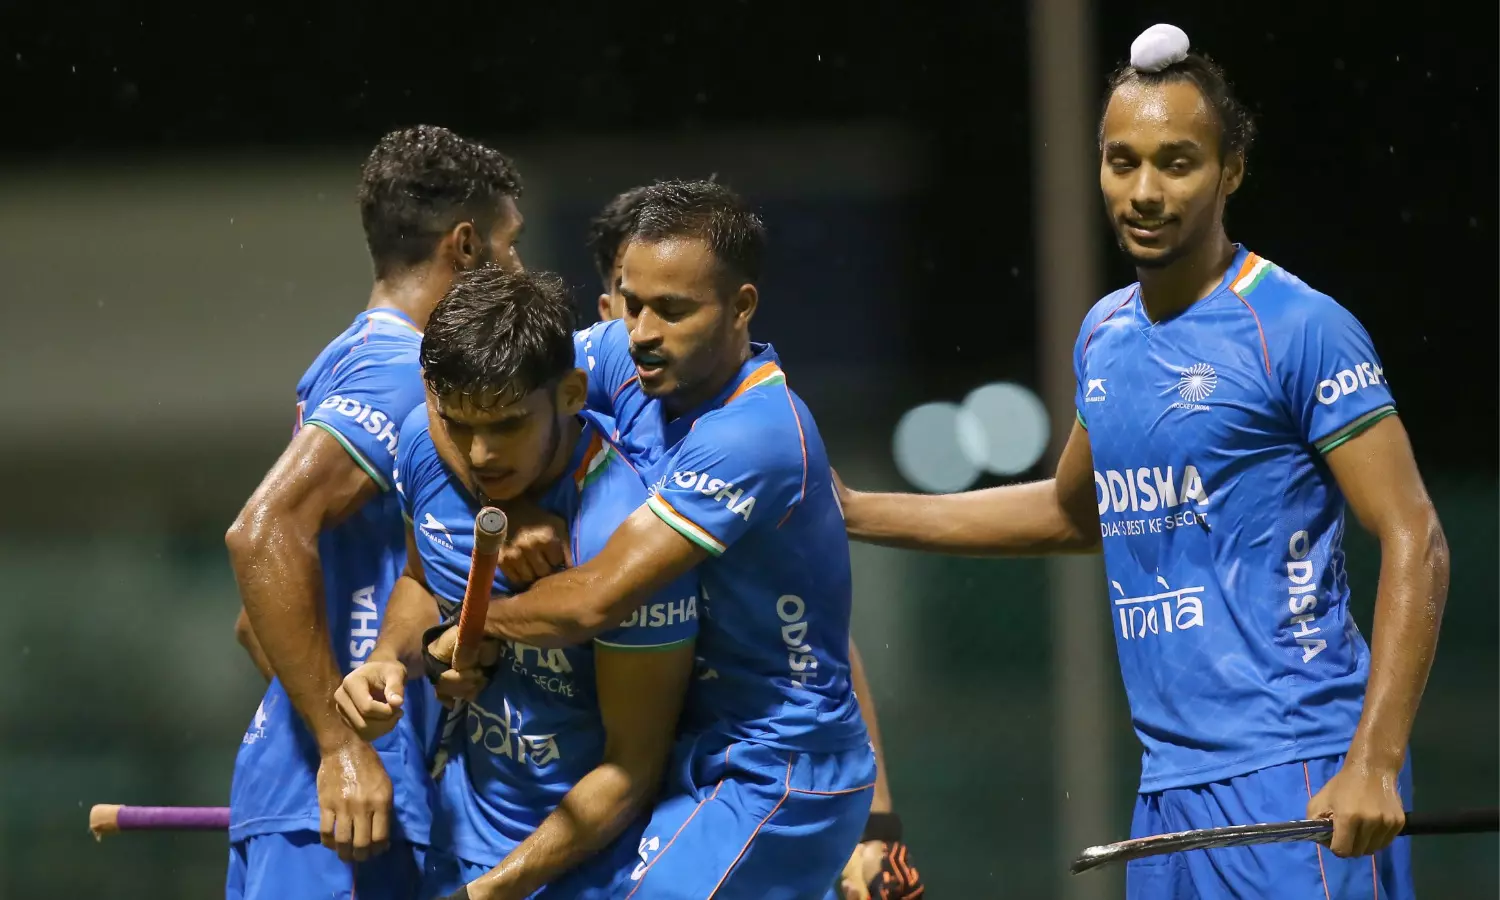 Sultan of Johor Cup HIGHLIGHTS India draws with Great Britain, qualifies for final- Scores, Results